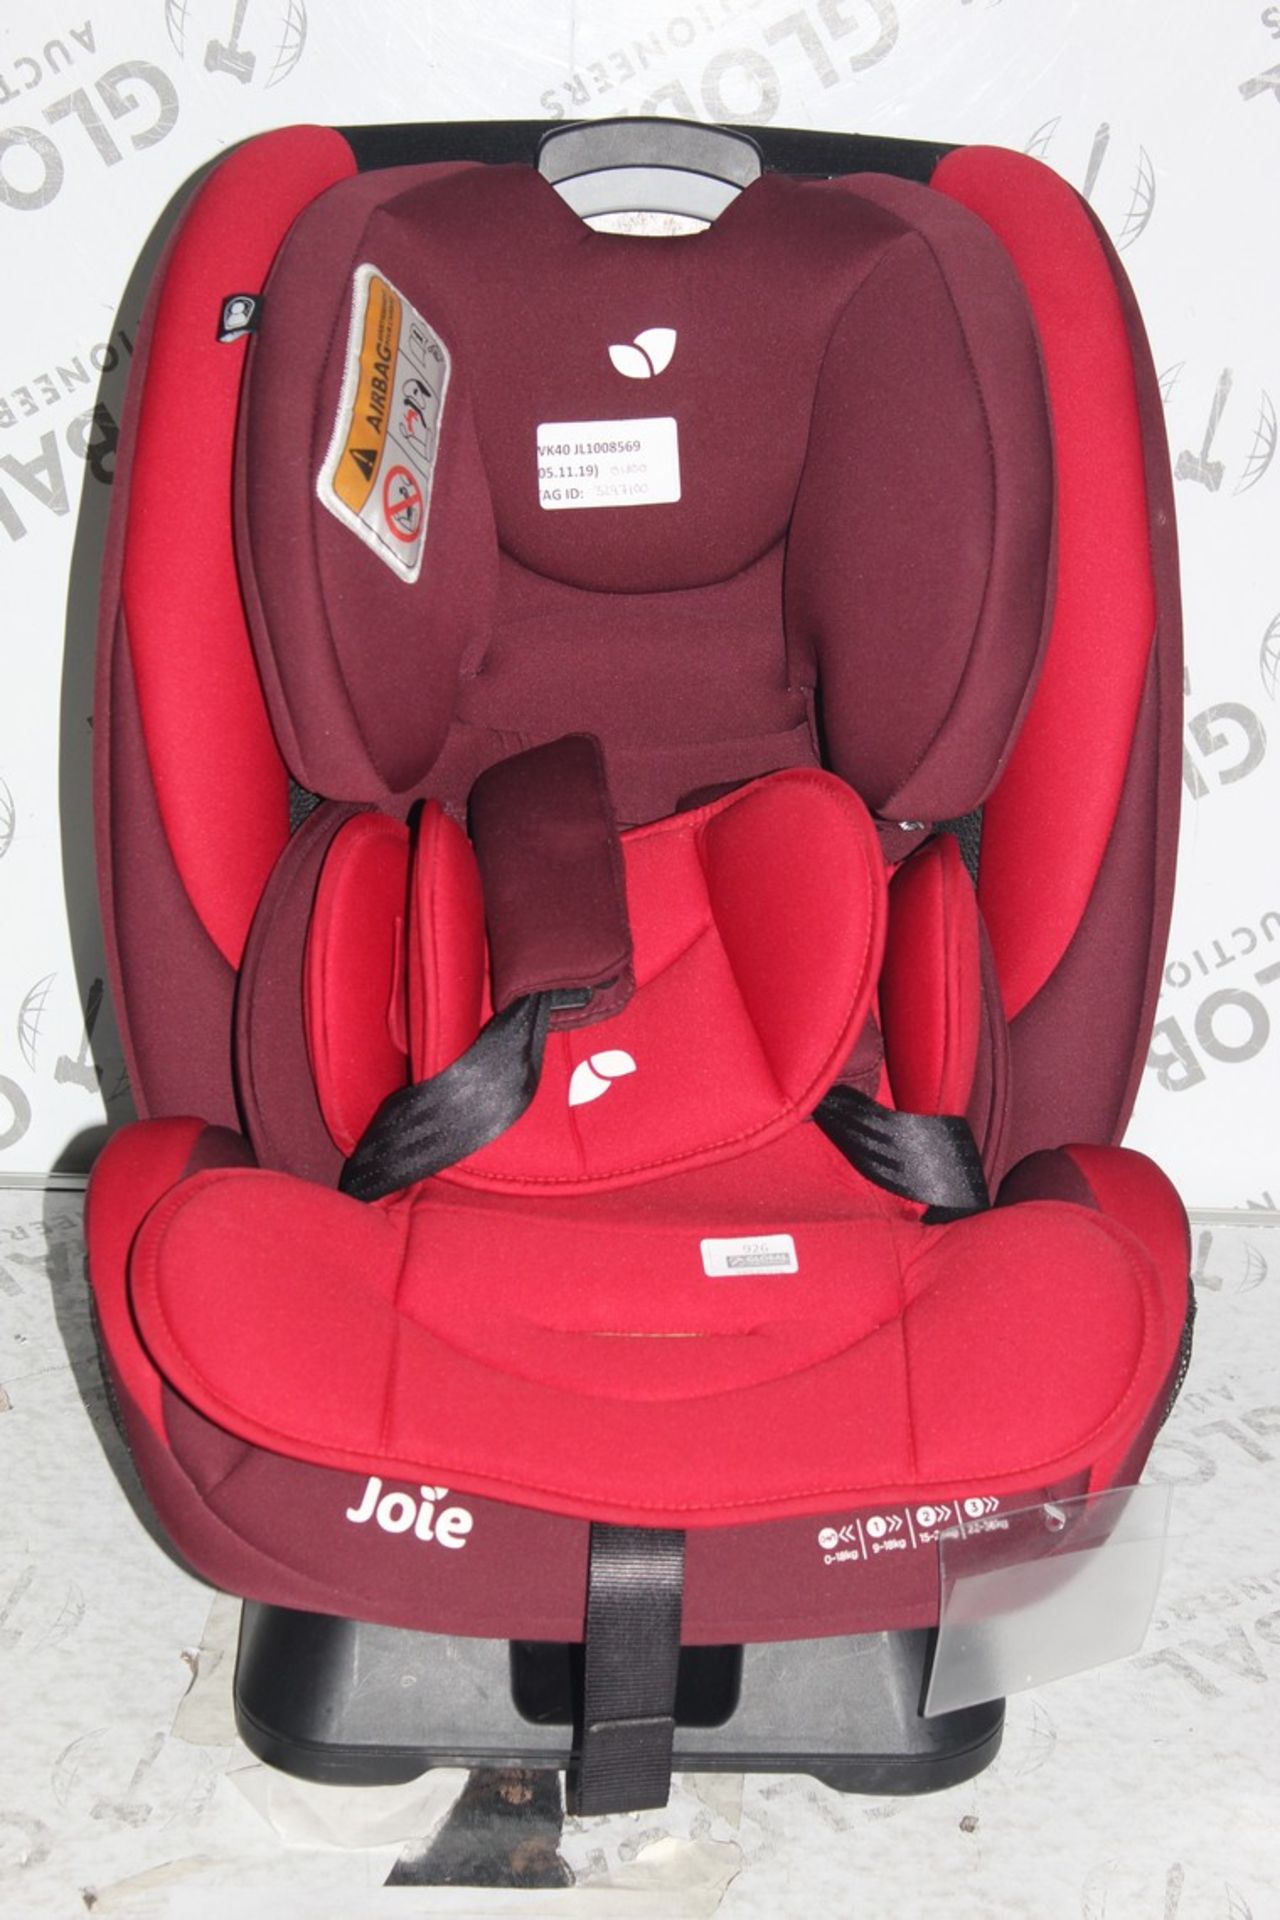 Joie In Car Kids Safety Seat in Red RRP £180 (3297100) (Public Viewing and Appraisals Available)